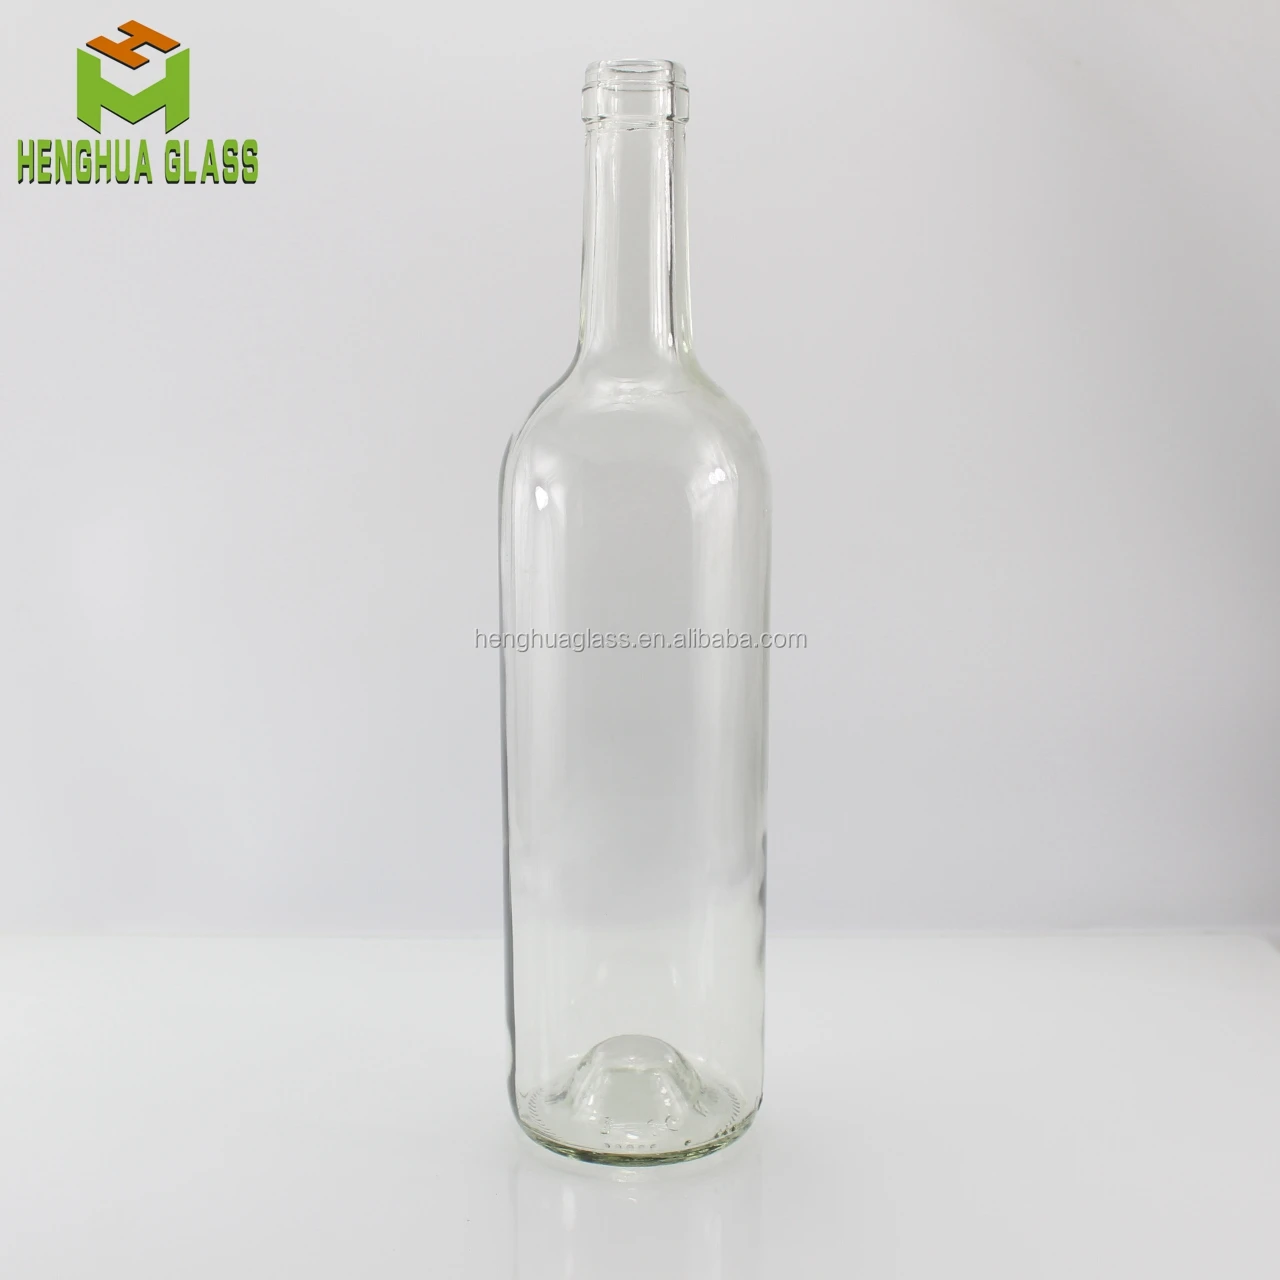 750 ml Hermitage Clear Glass Liquor Bottles - 6/Case, Clear Type III 18.5 mm